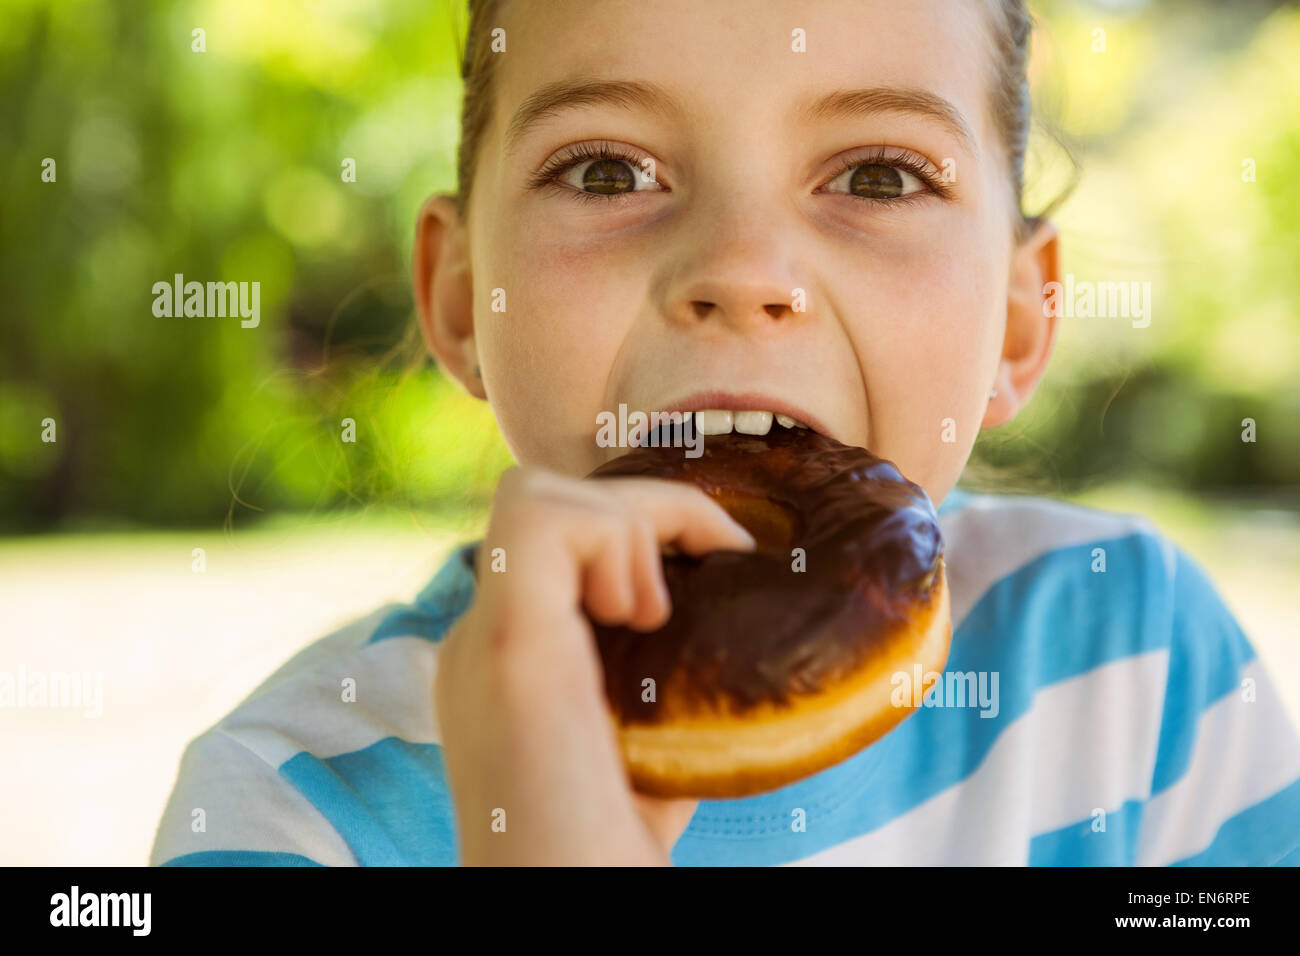 Cute little girl eating donut Banque D'Images